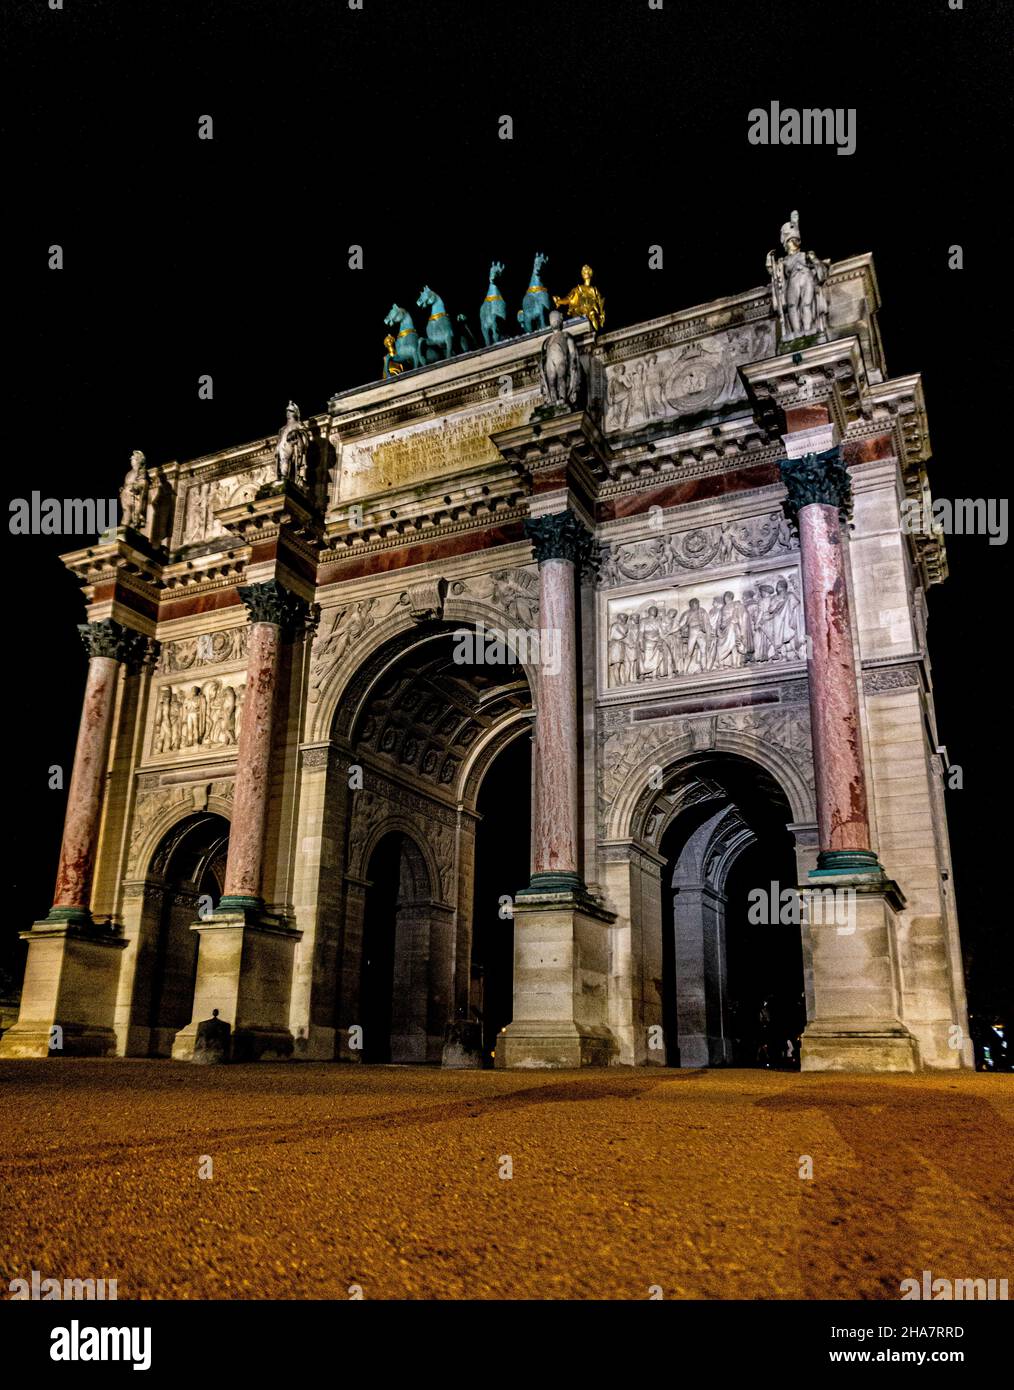 The Arc de Triomphe du Carrousel in Paris. French monument to commemorate Napoleon's military victories. Stock Photo